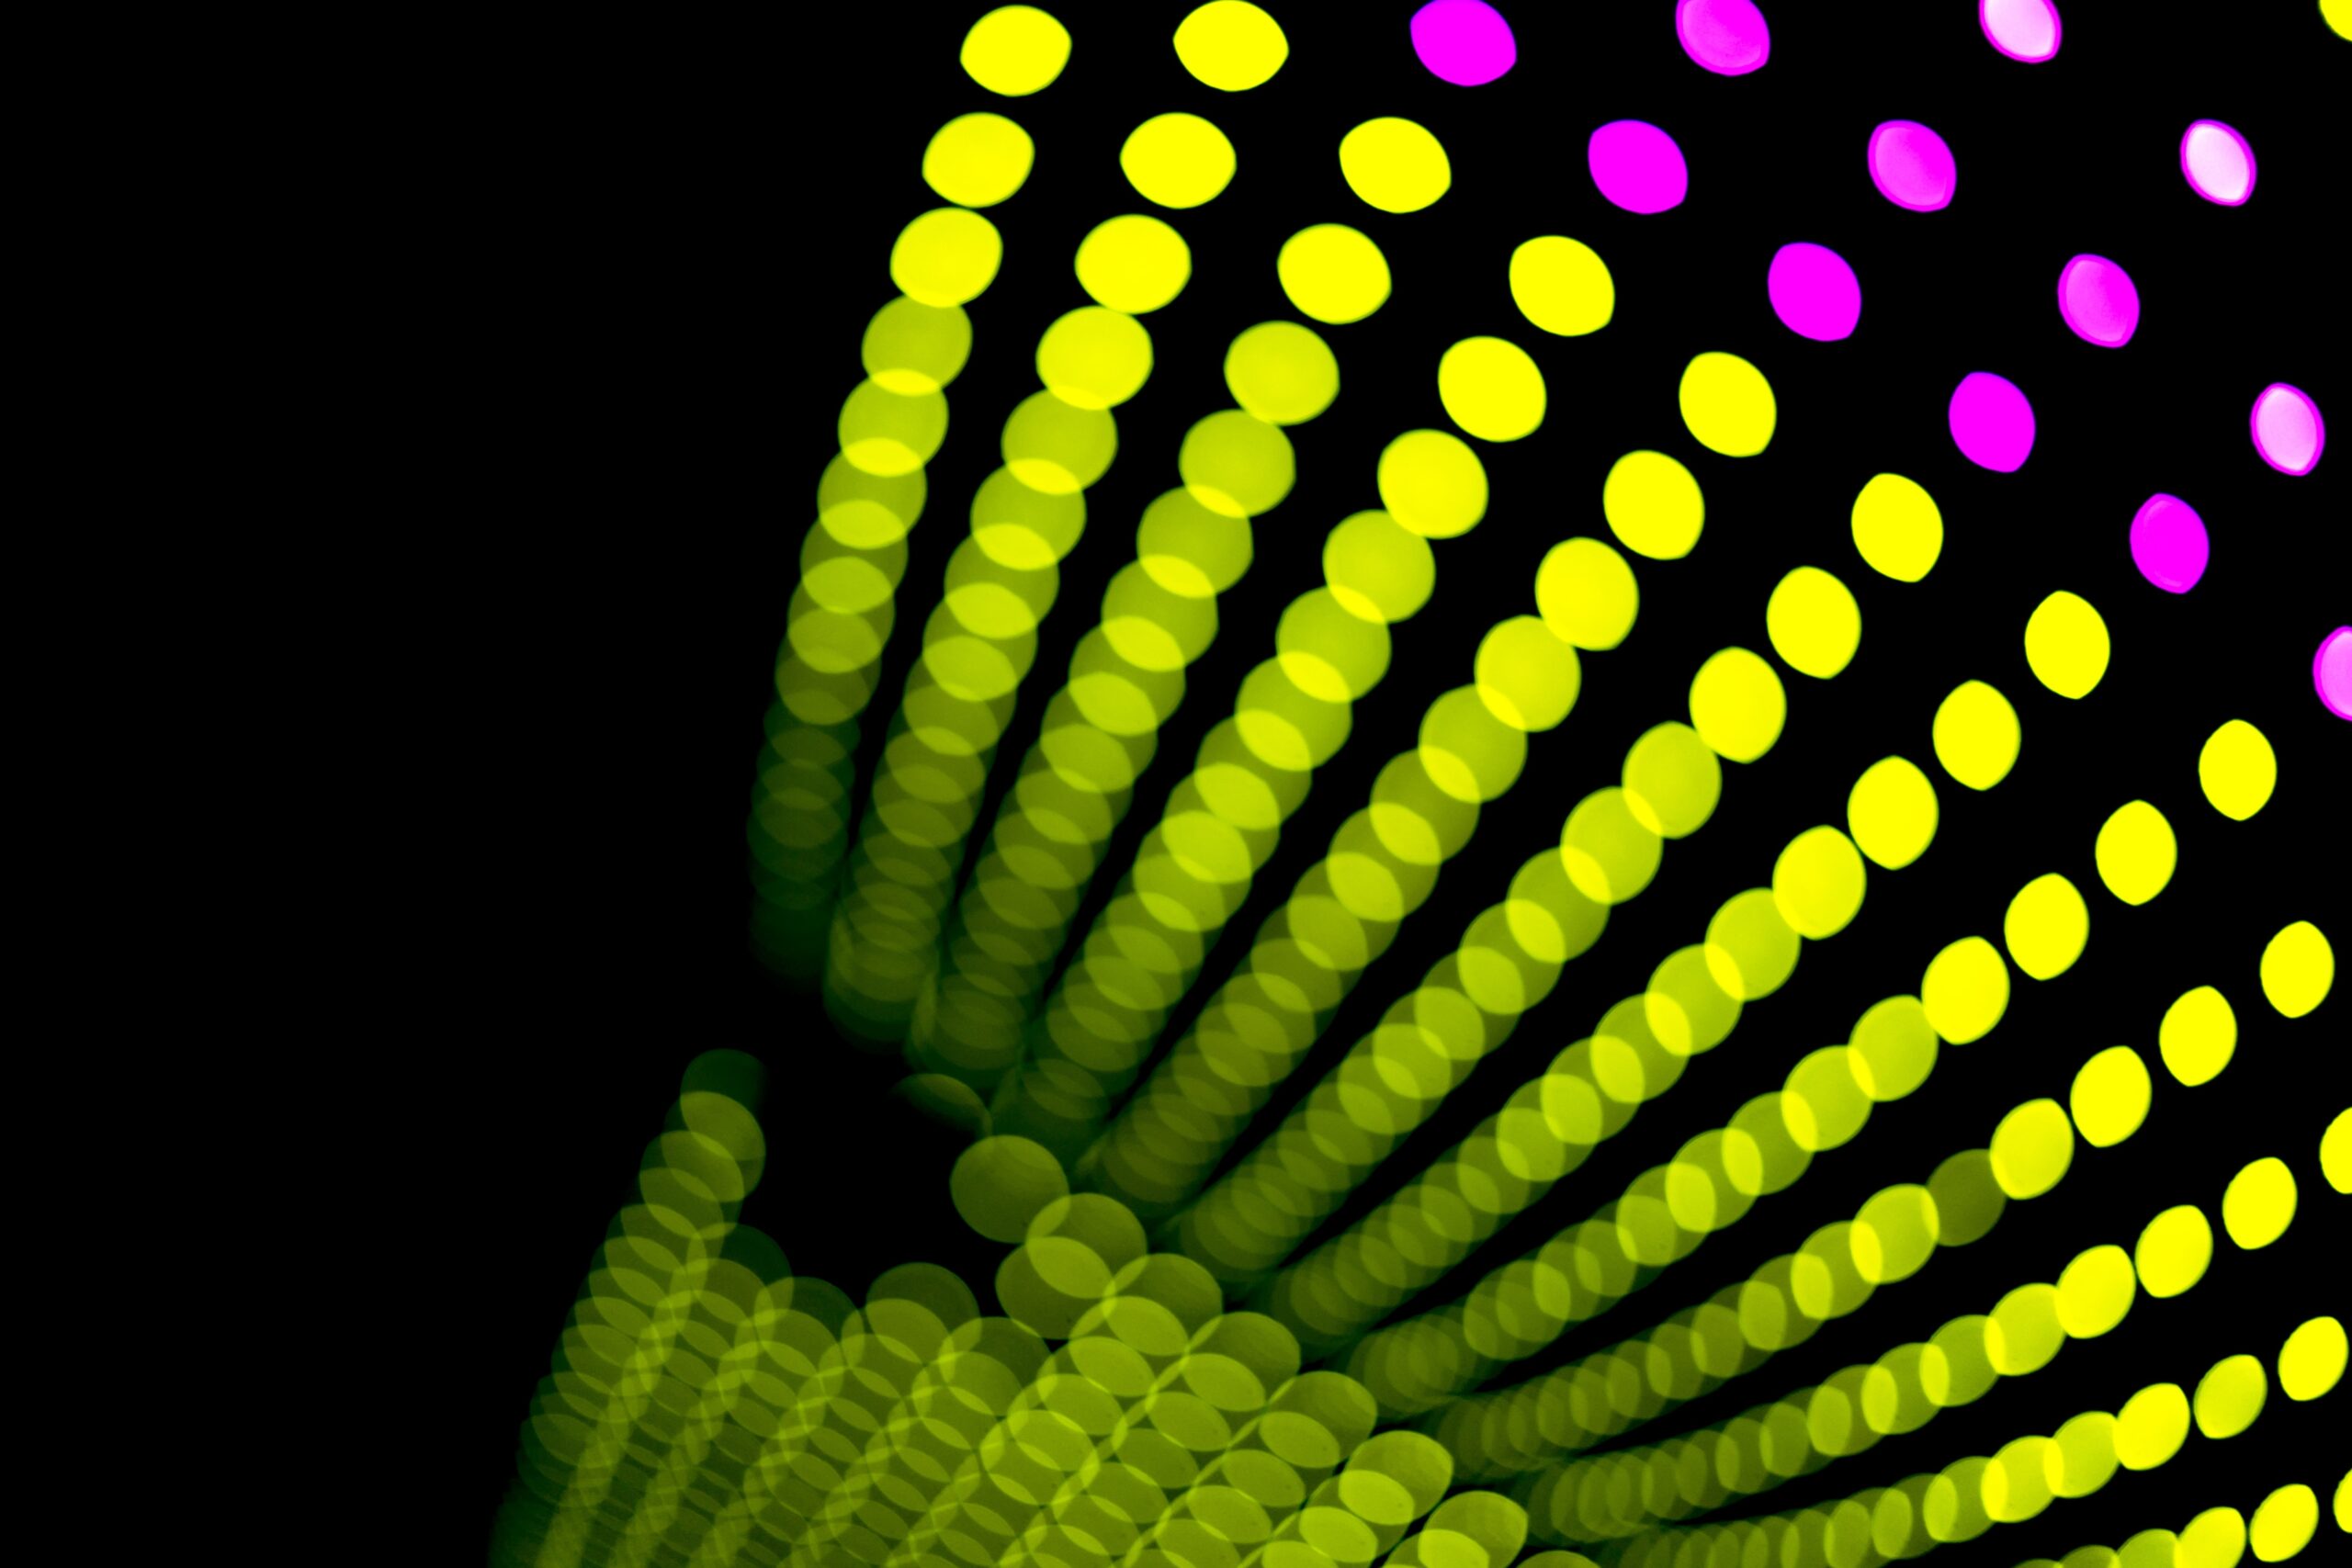 Abstract image of yellow and pink LEDs